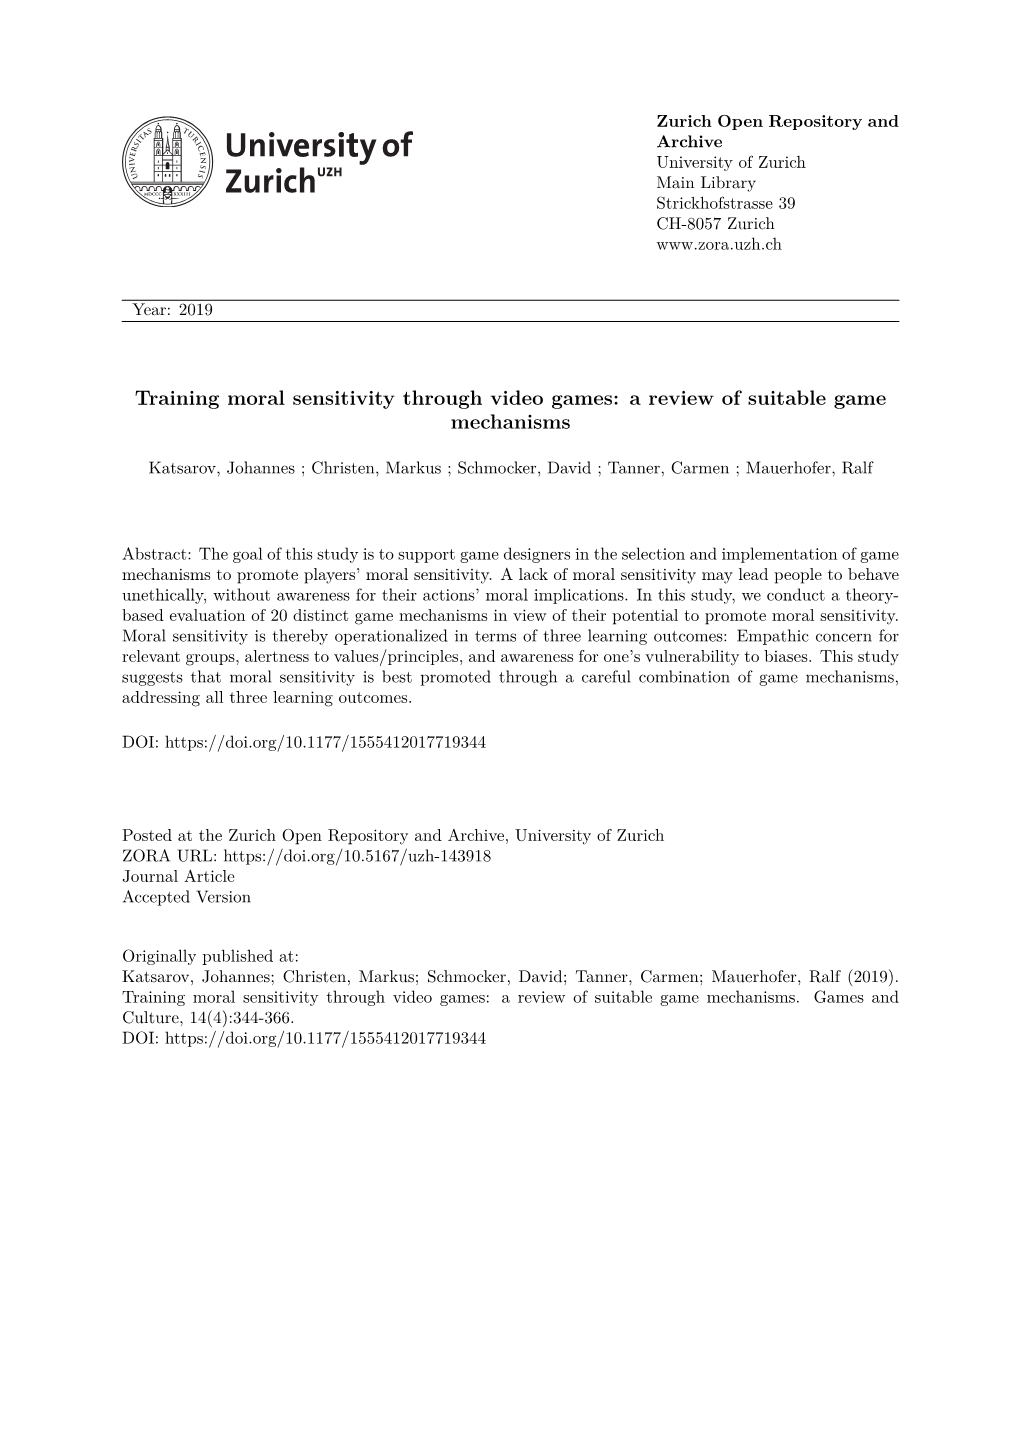 Training Moral Sensitivity Through Video Games: a Review of Suitable Game Mechanisms